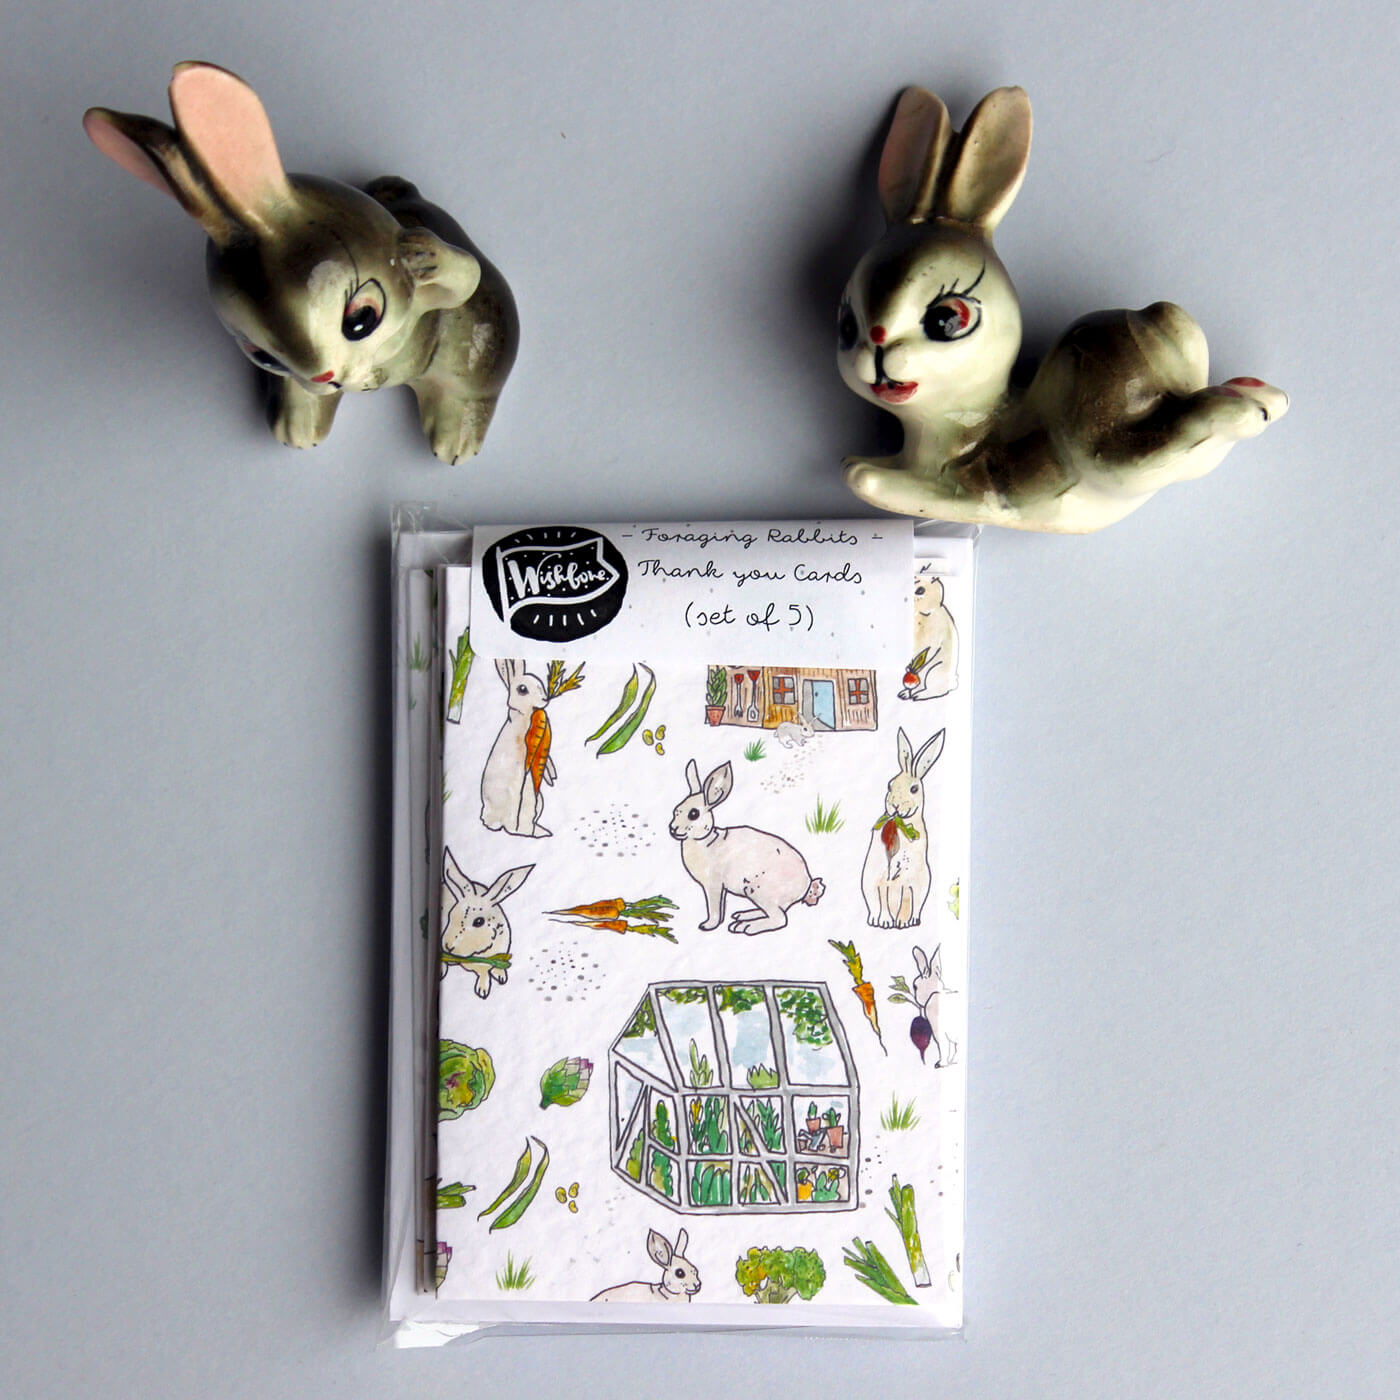 foraging-rabbits-thank-you-cards